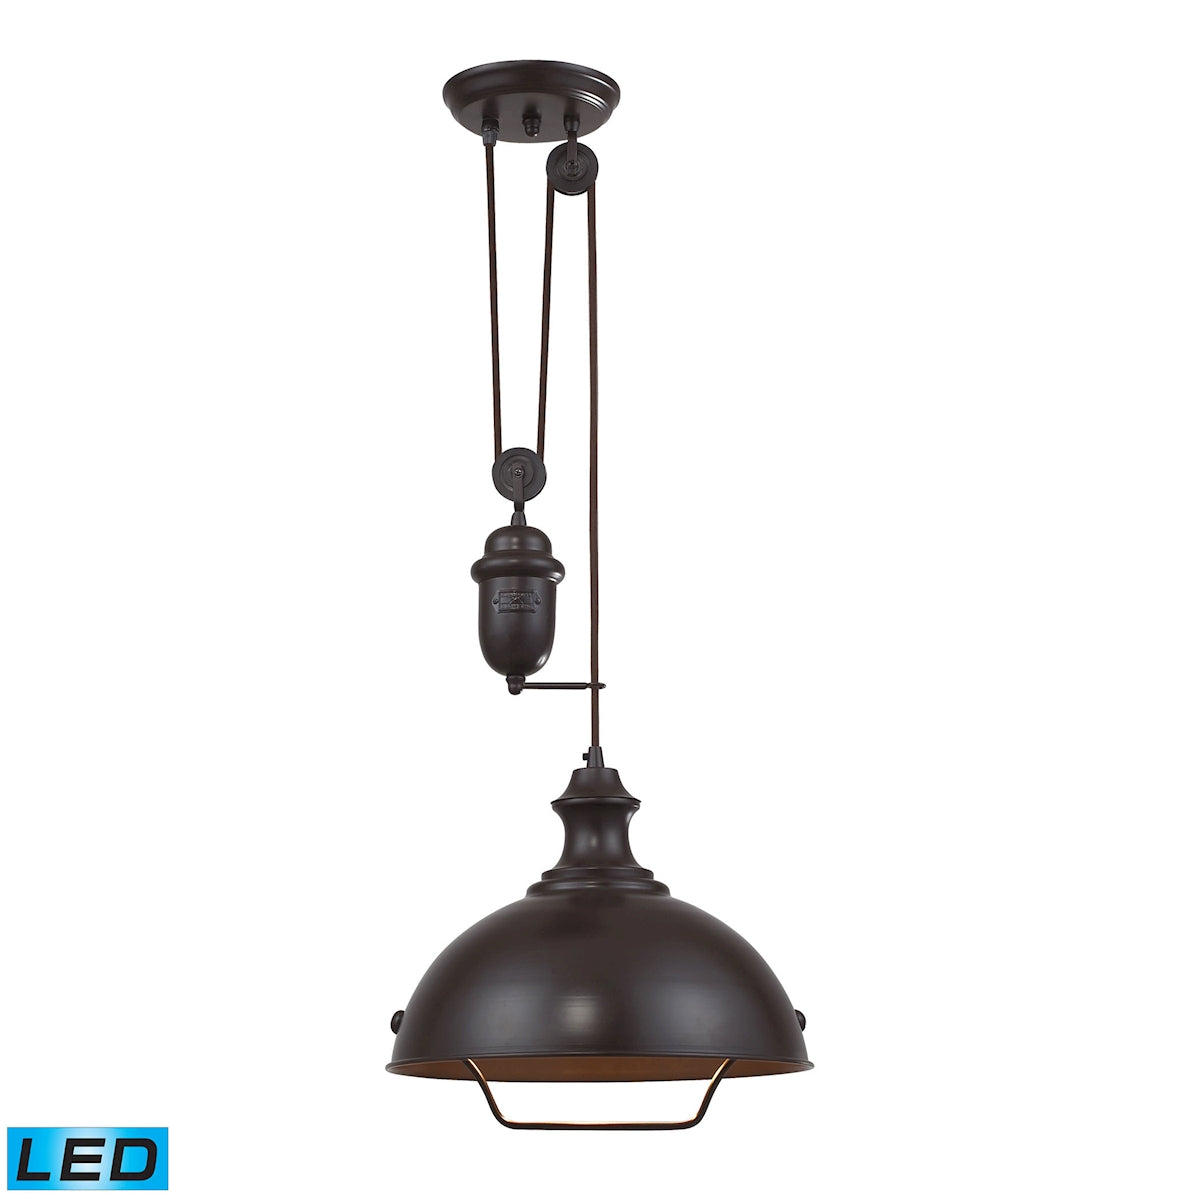 ELK Lighting 65071-1-LED Farmhouse 1-Light Adjustable Pendant in Oiled Bronze with Matching Shade - Includes LED Bulb